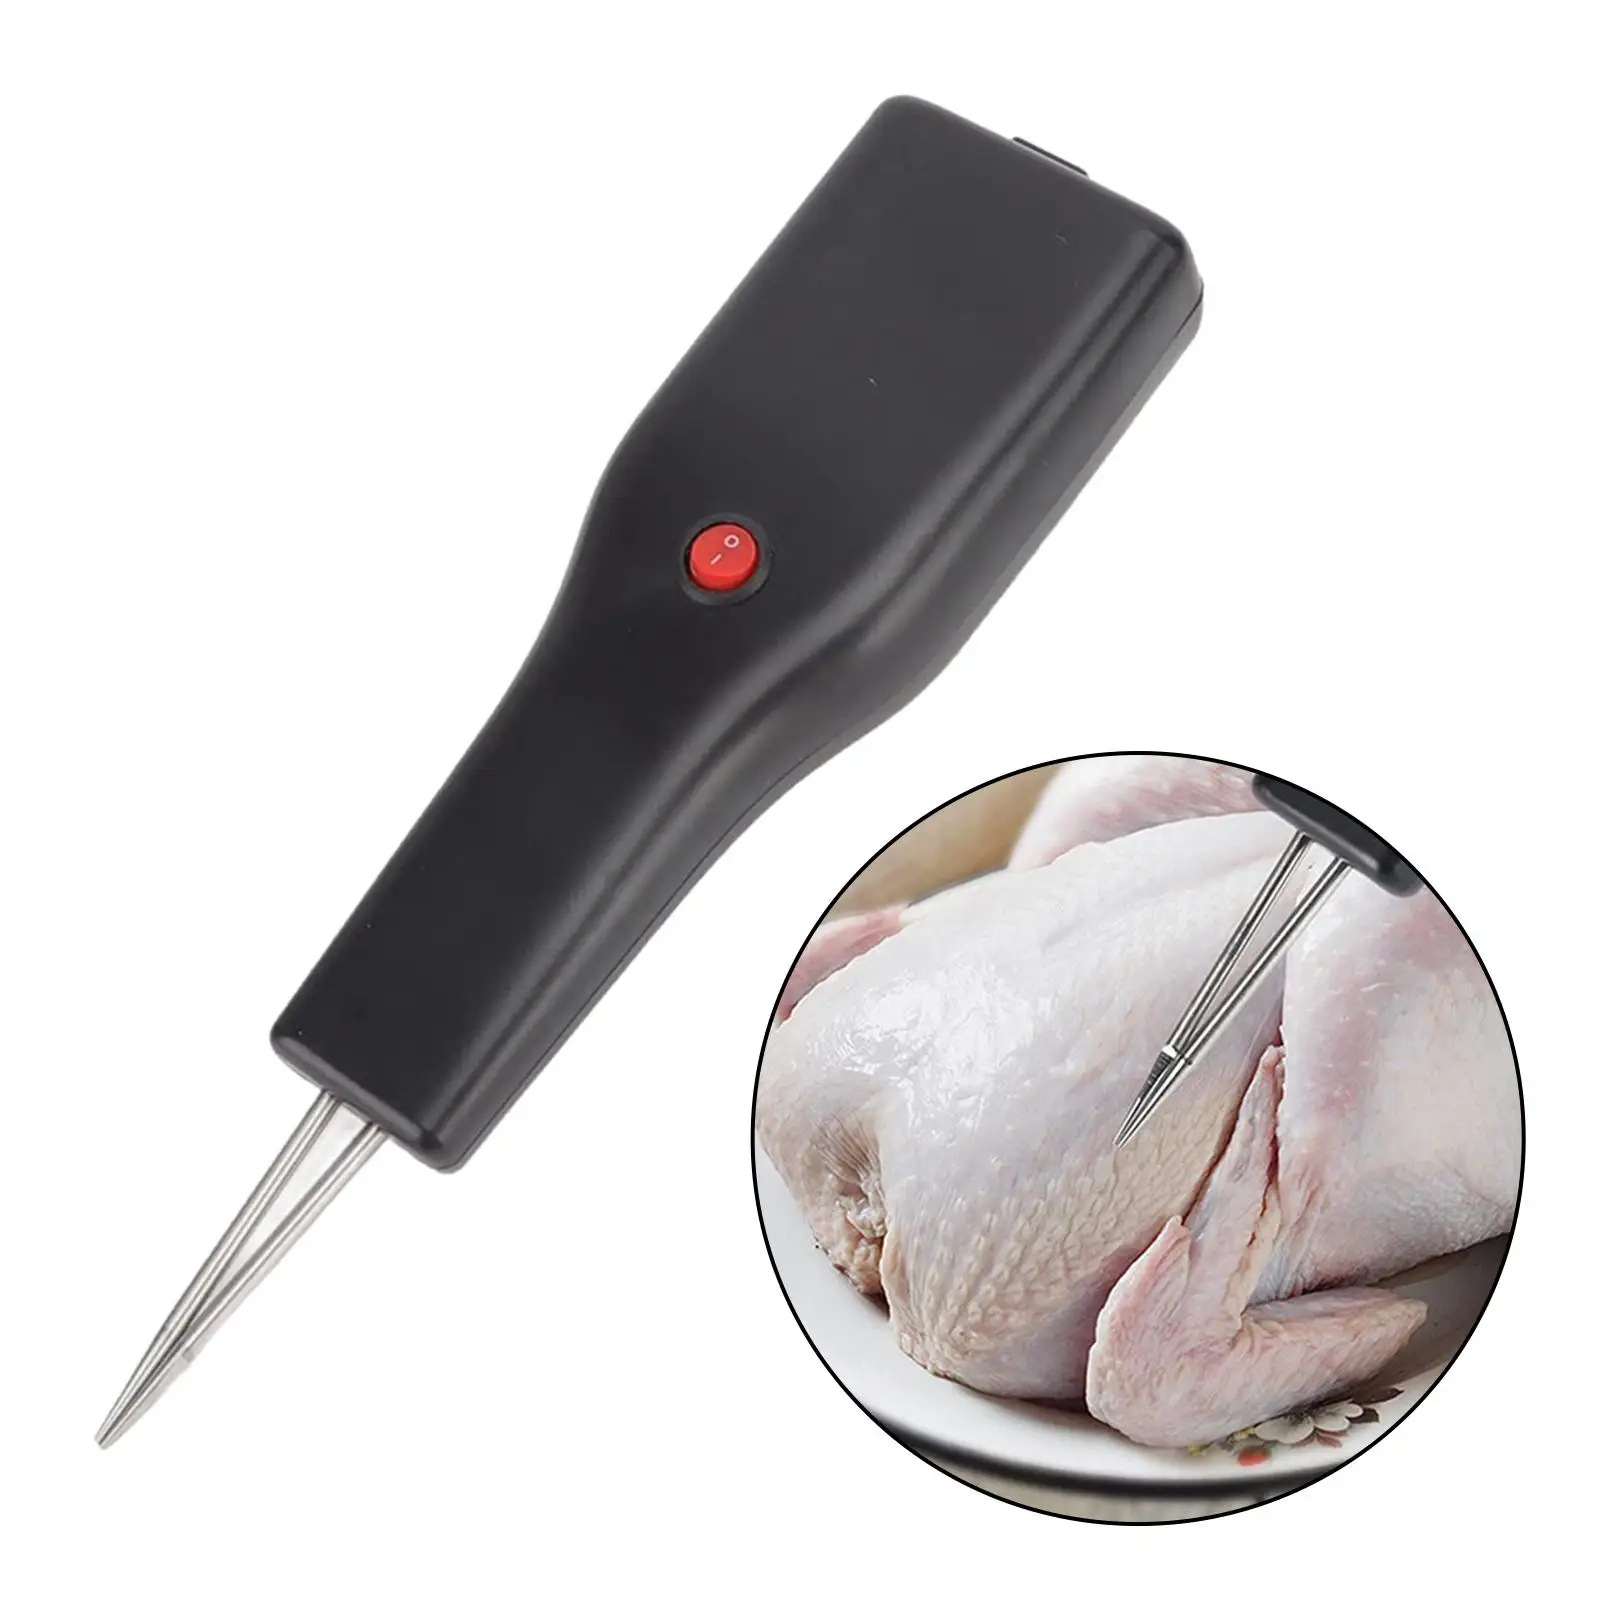 Handheld Electric Poultry Plucker Hair Remover Tool Feather Plucking for Household Camping